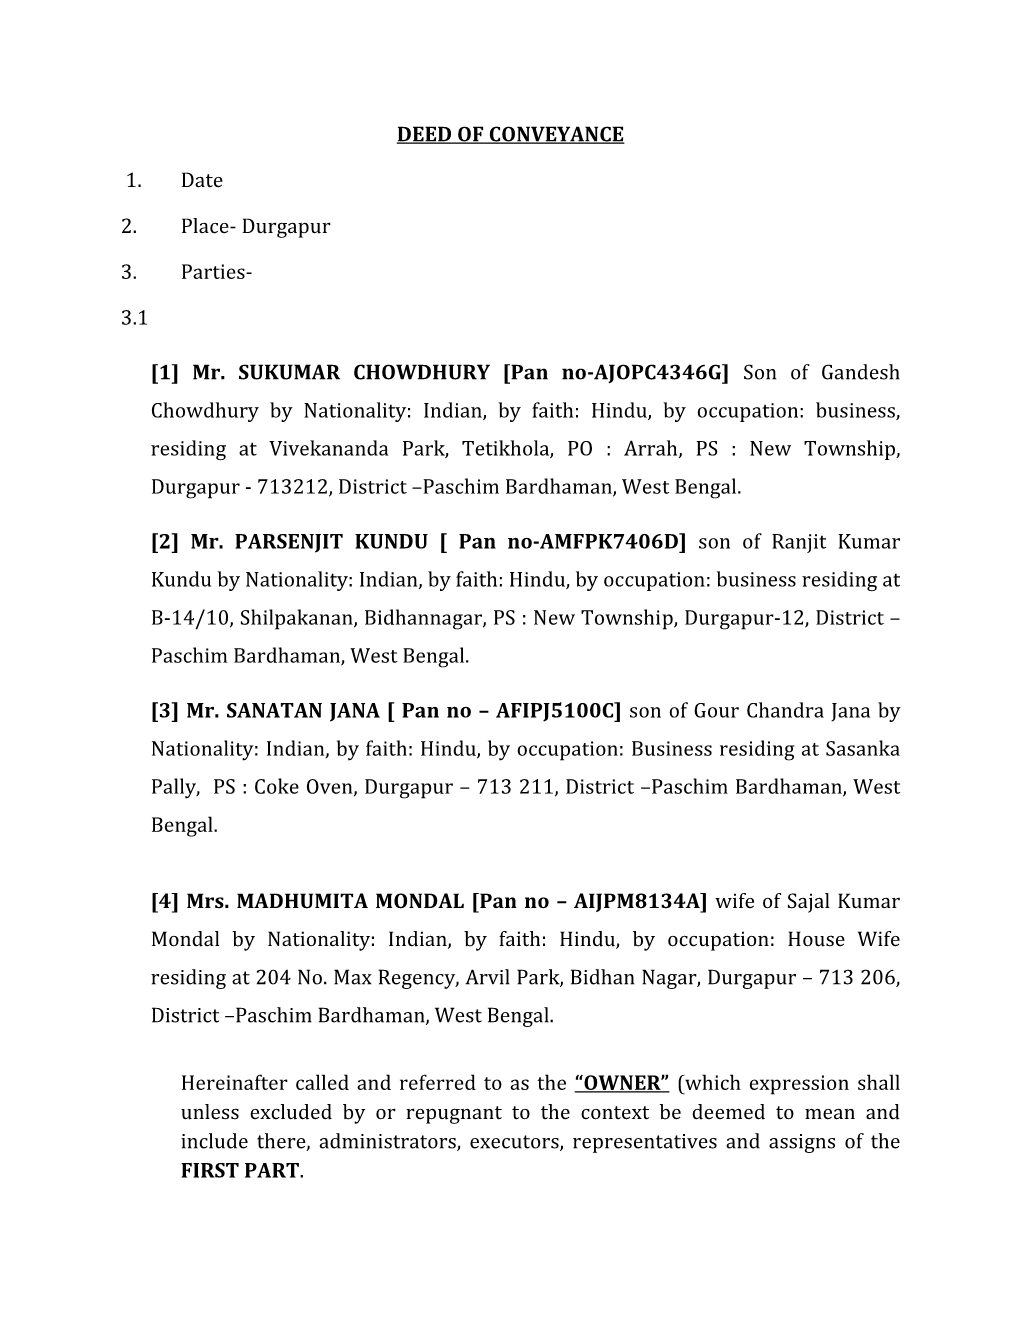 DEED of CONVEYANCE 1. Date 2. Place- Durgapur 3. Parties- 3.1 [1